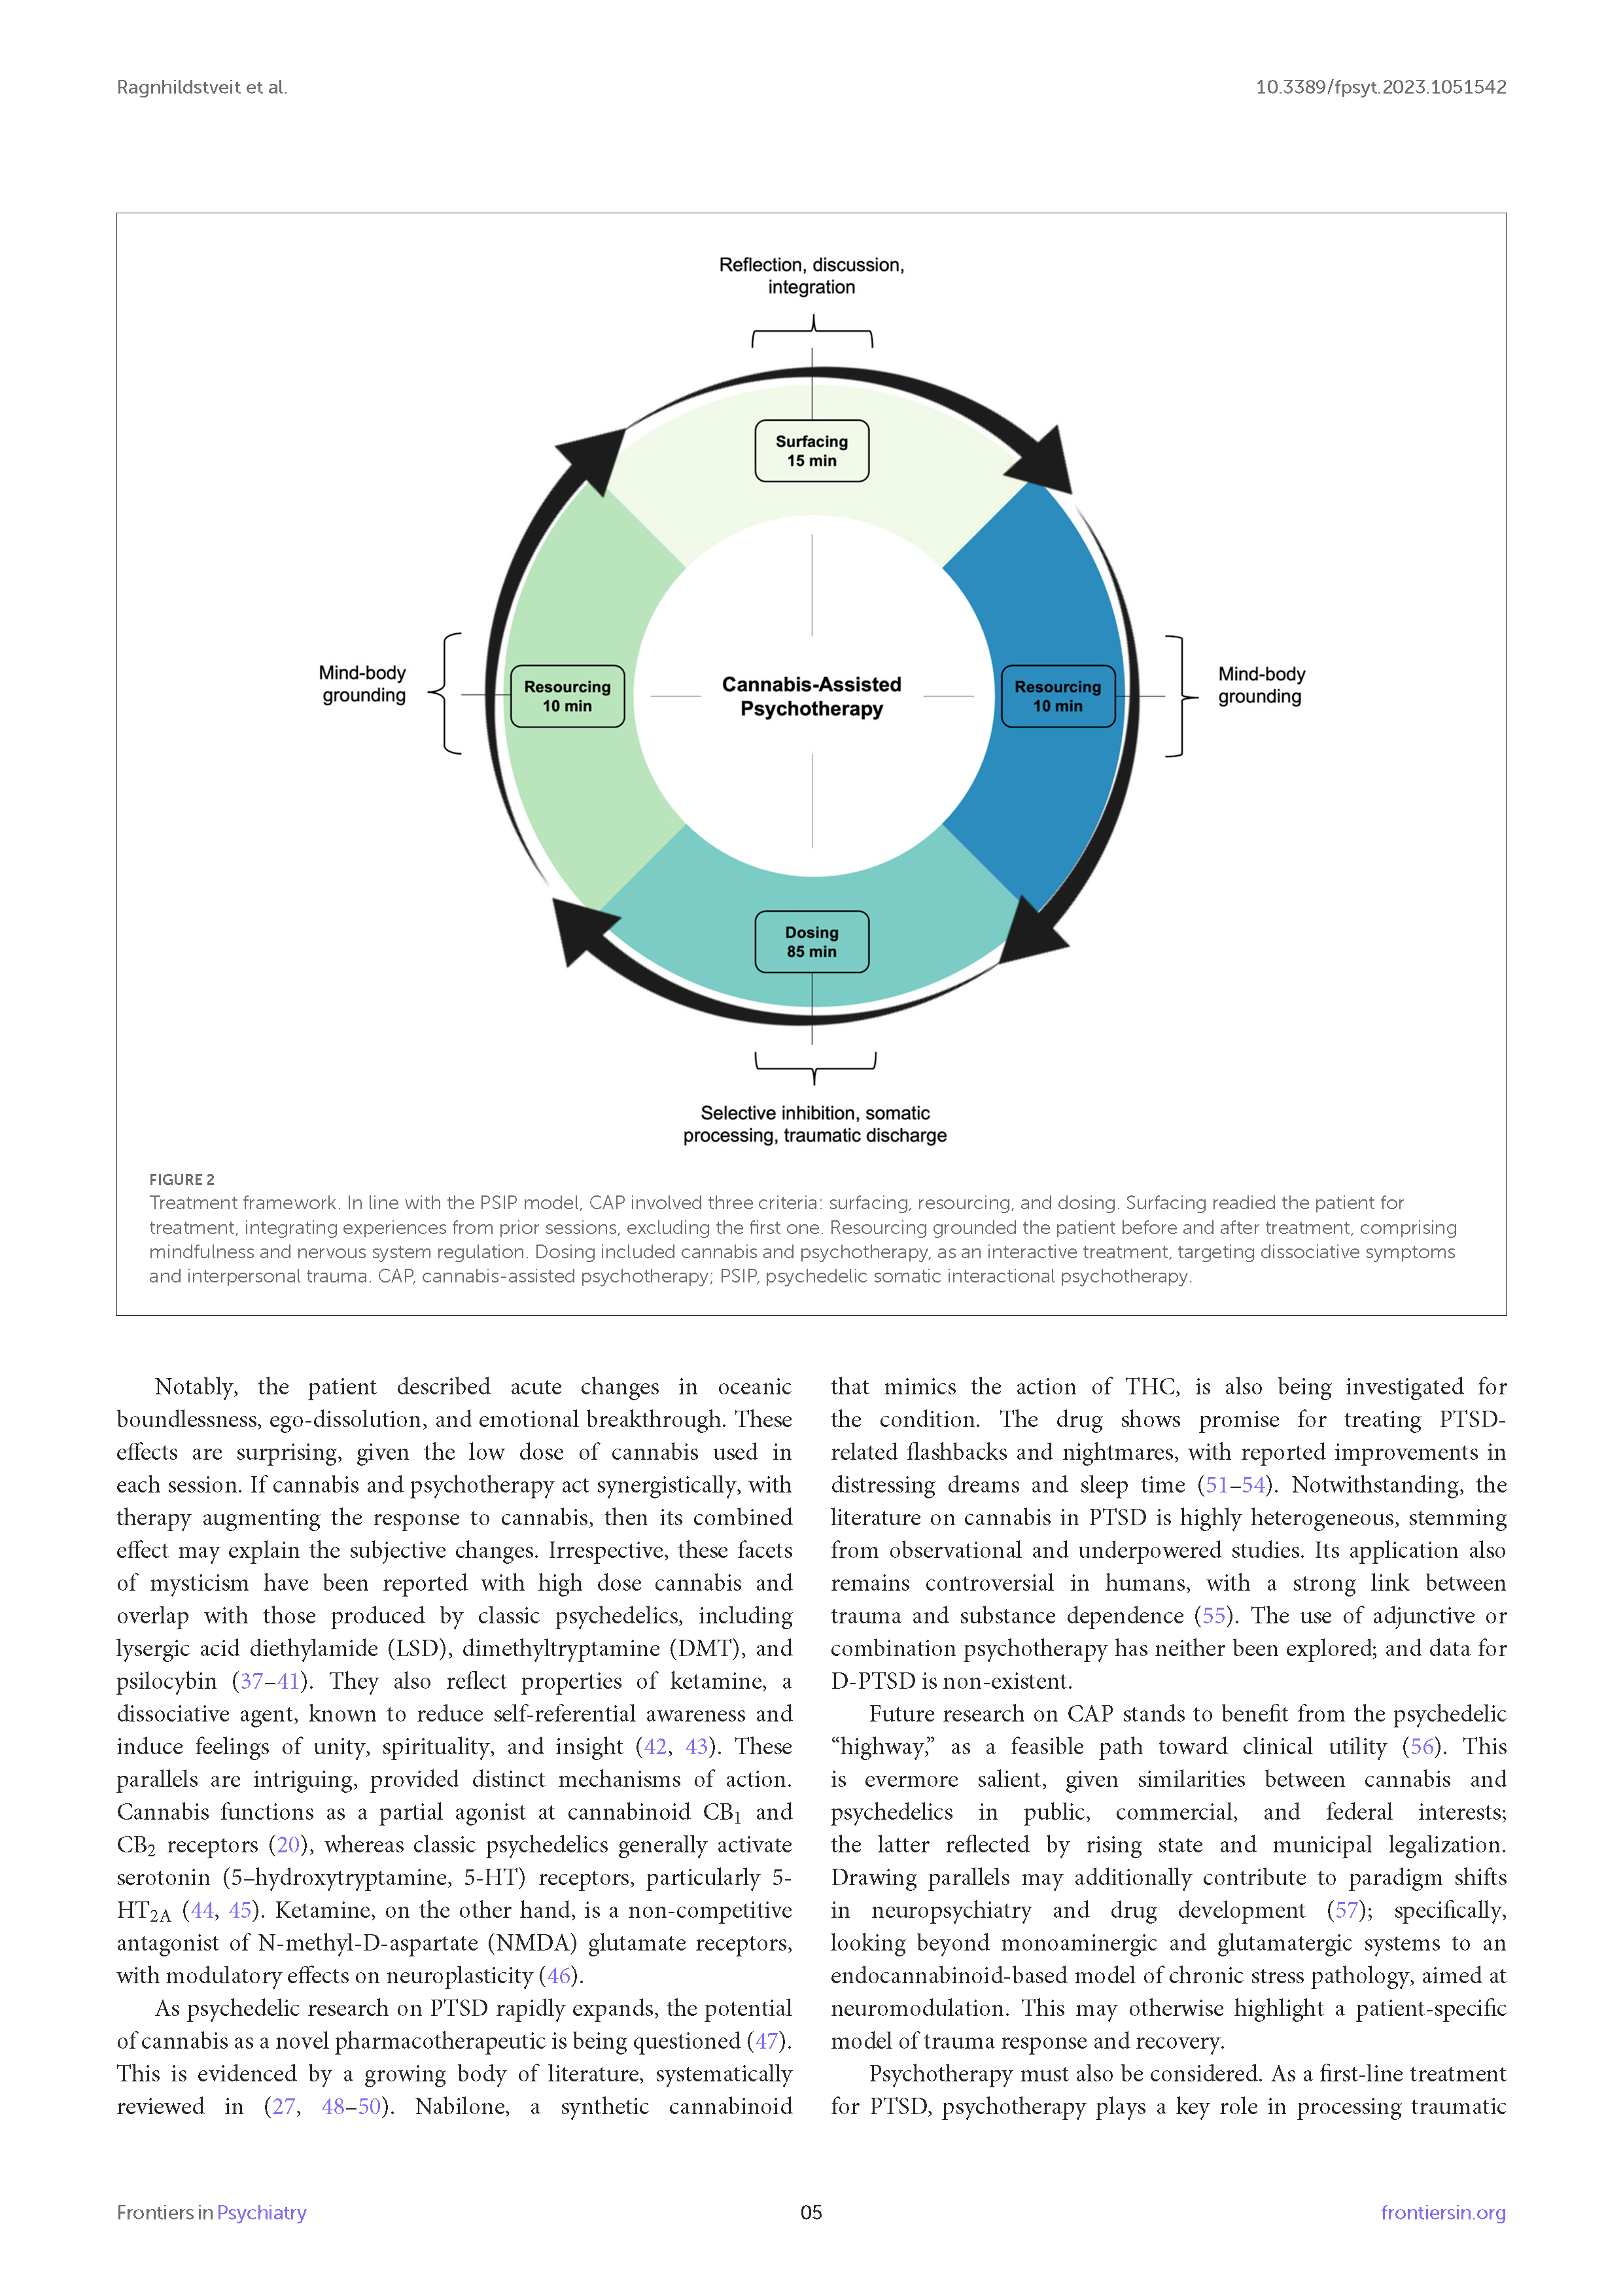 Cannabis-assisted psychotherapy for complex dissociative PTSD - A case report_Page_5.png